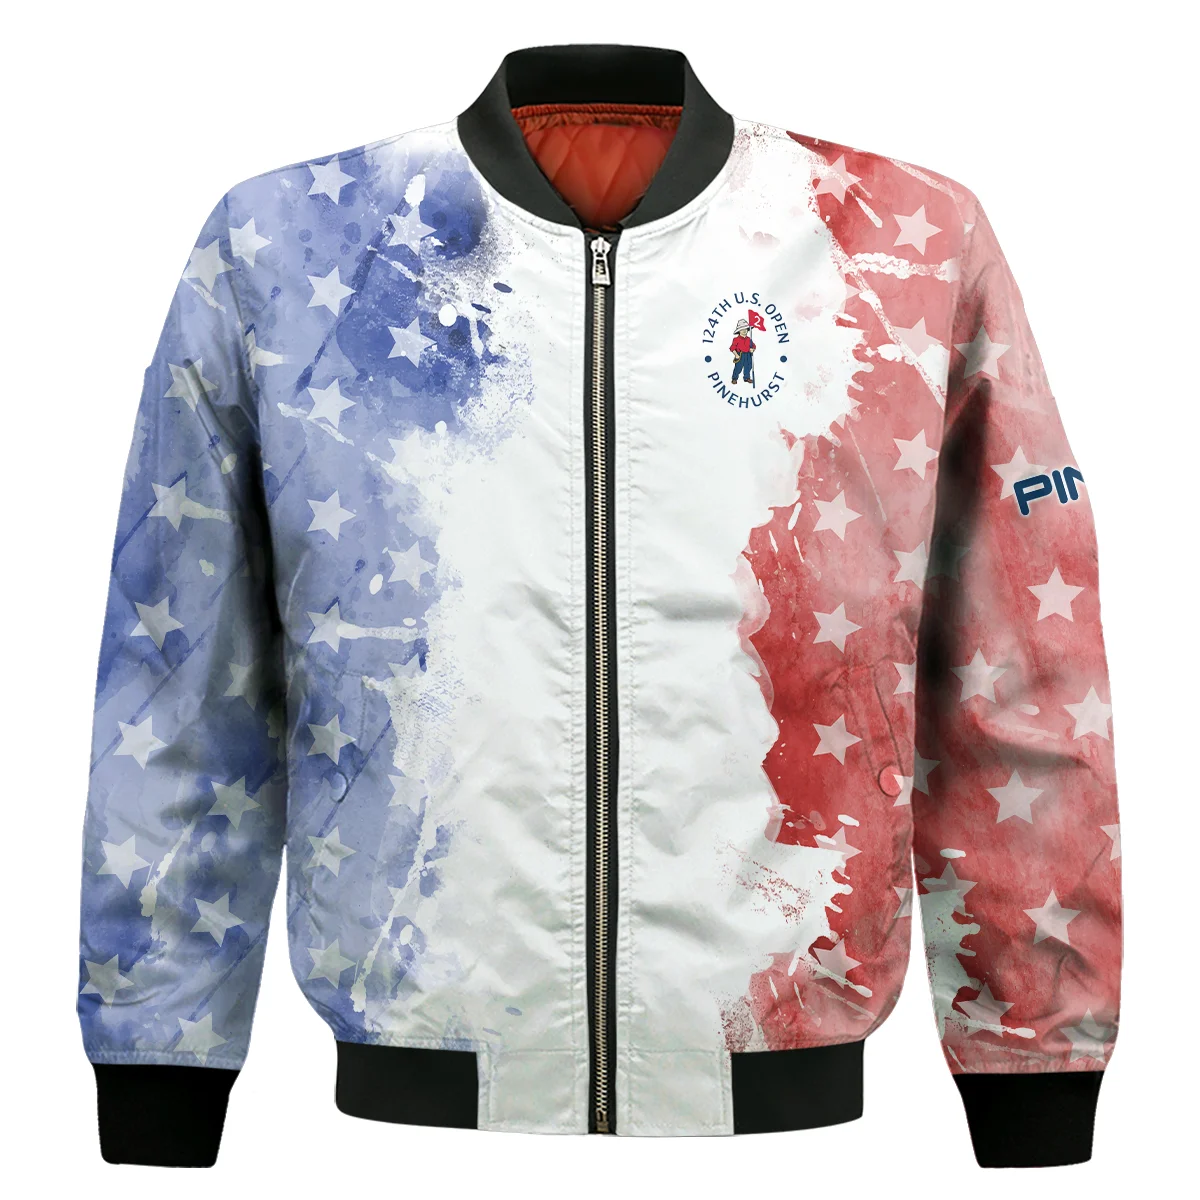 124th U.S. Open Pinehurst Special Version Ping Bomber Jacket Blue Red Watercolor Bomber Jacket